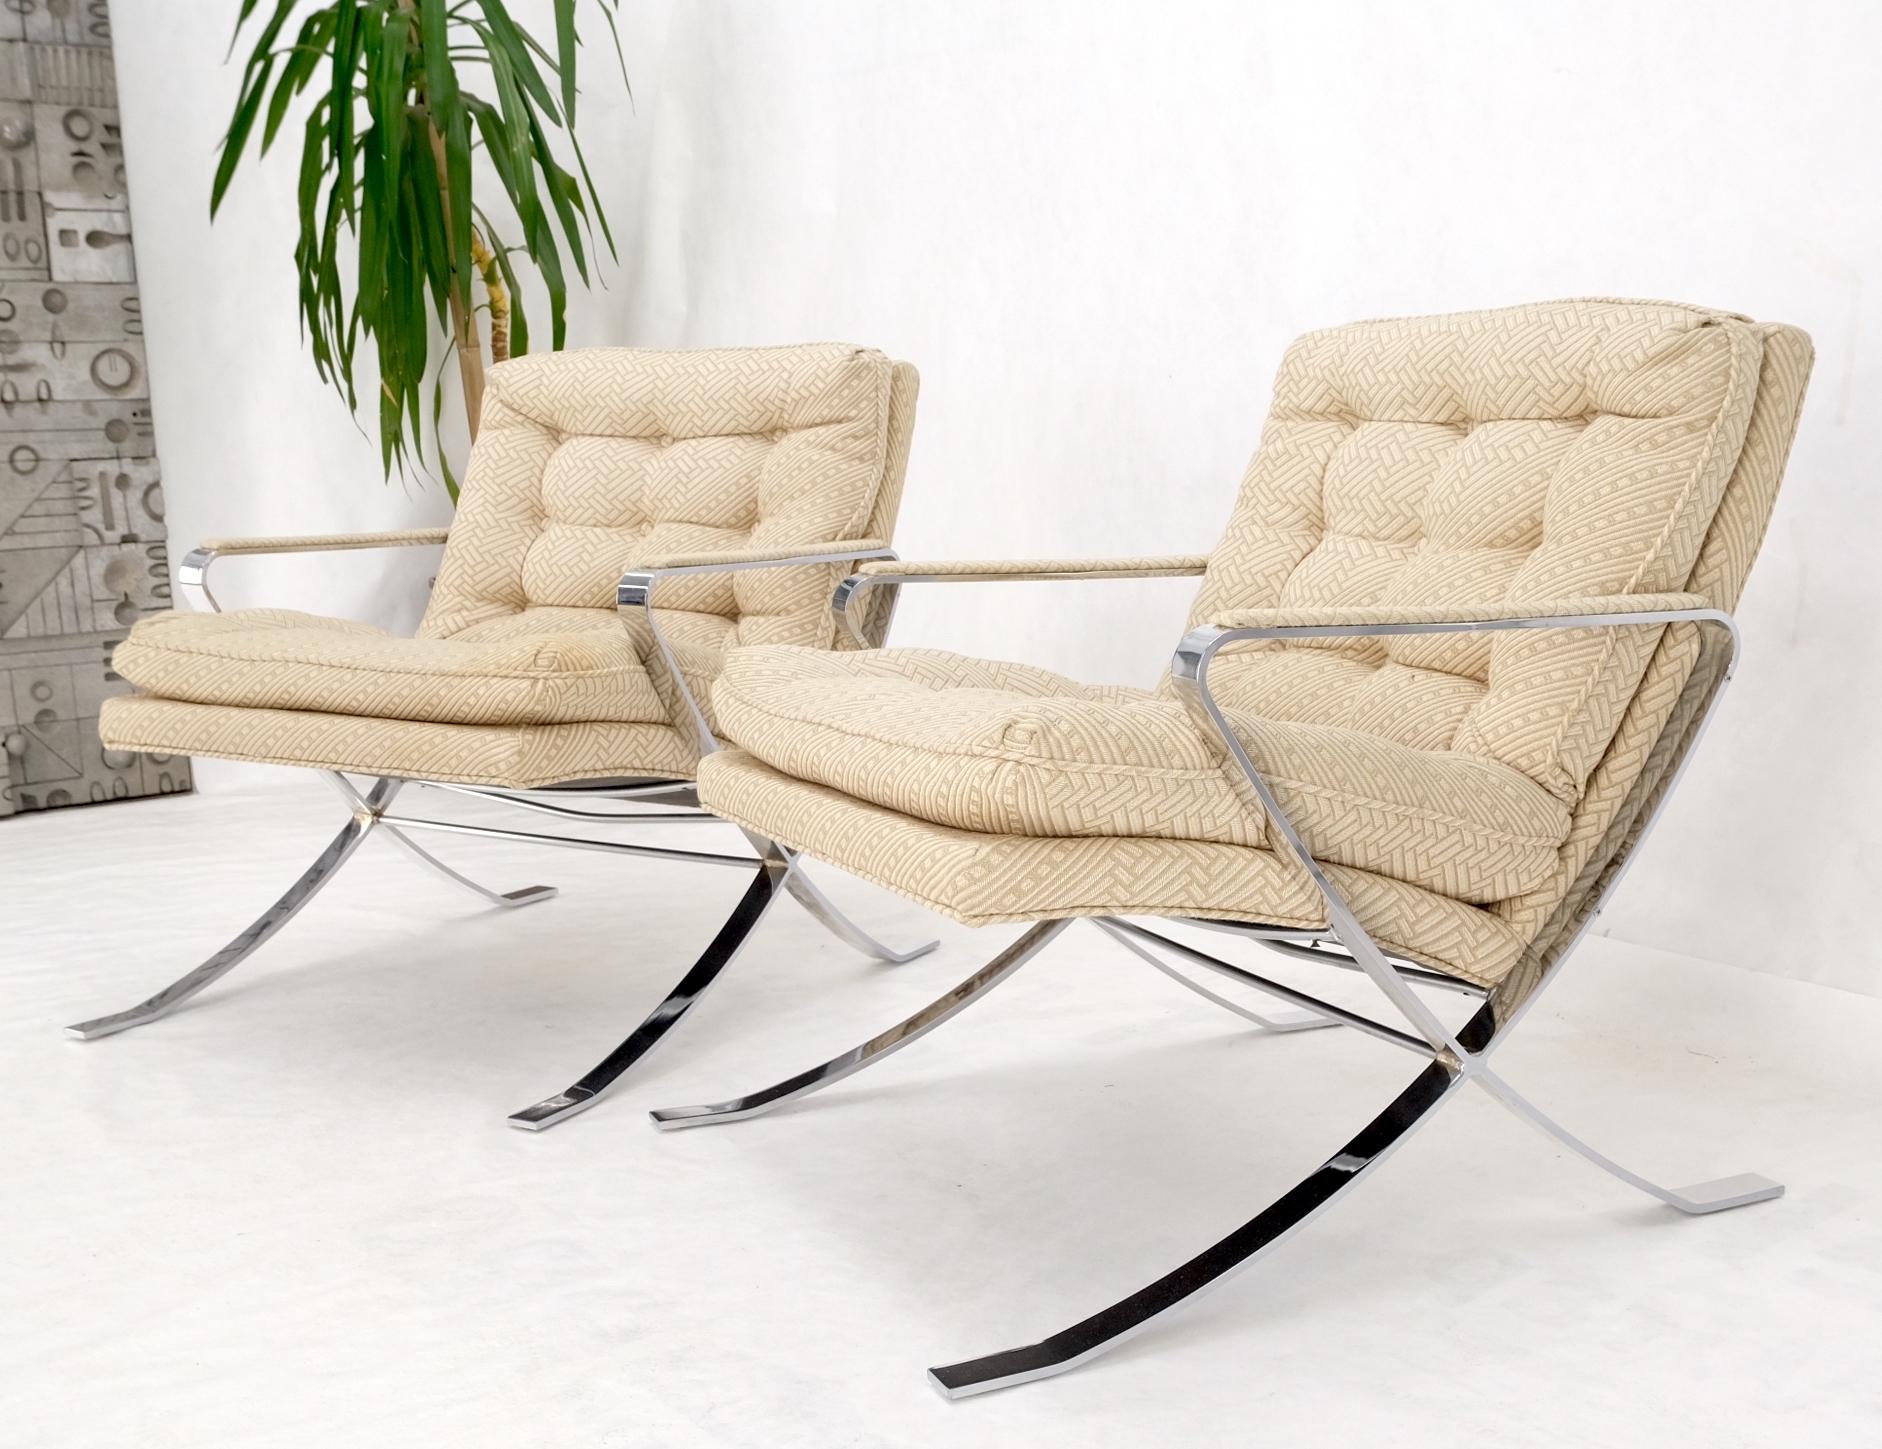 Pair of Mid-Century Modern Polished Stainless Steel Bauhaus Arm Lounge Chairs For Sale 7